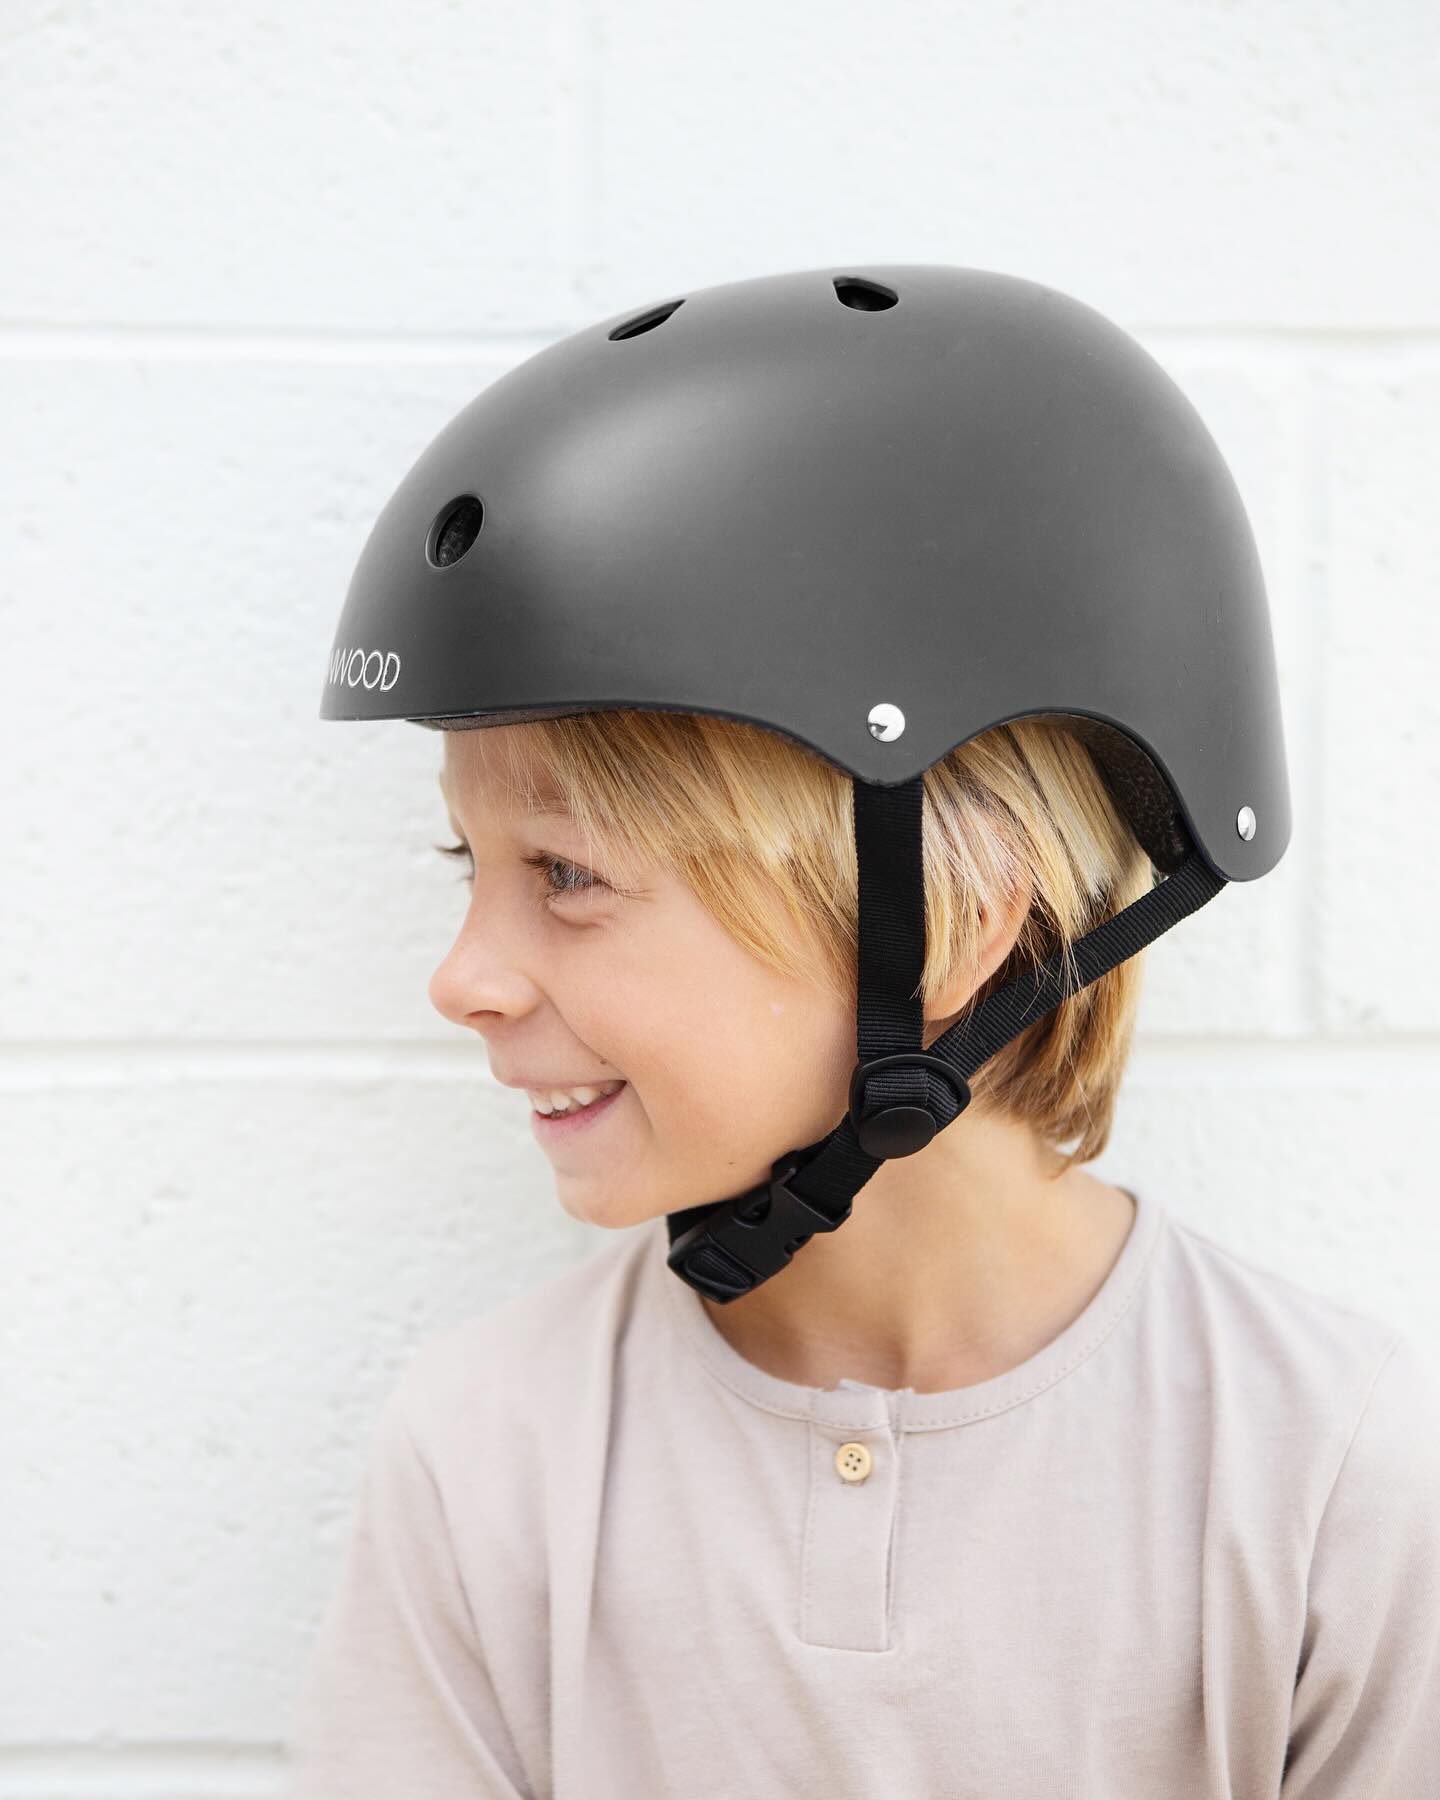 CLASSIC HELMET - BLACKAdjustable chinstrap and dial-fit adjustment system for a comfortable and safe ride. Available in 15 different colorsDiscover all helmets on our website, link is in our bio